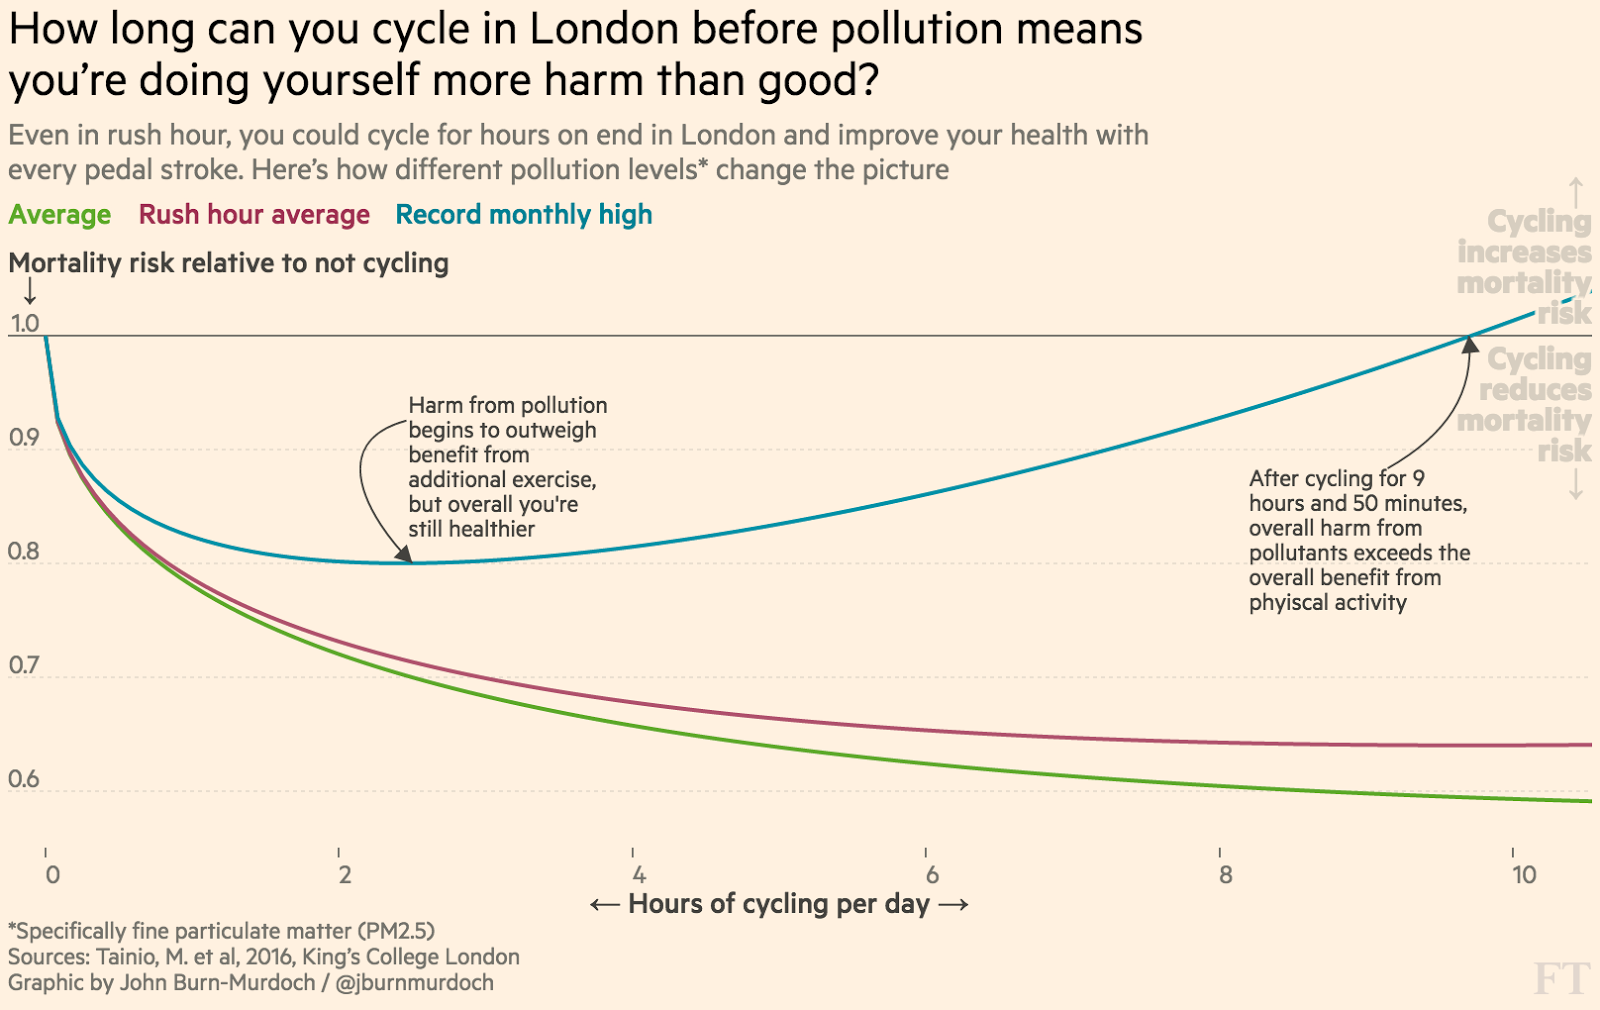 How long it takes cycling in cities before pollution means it does you more harm than good